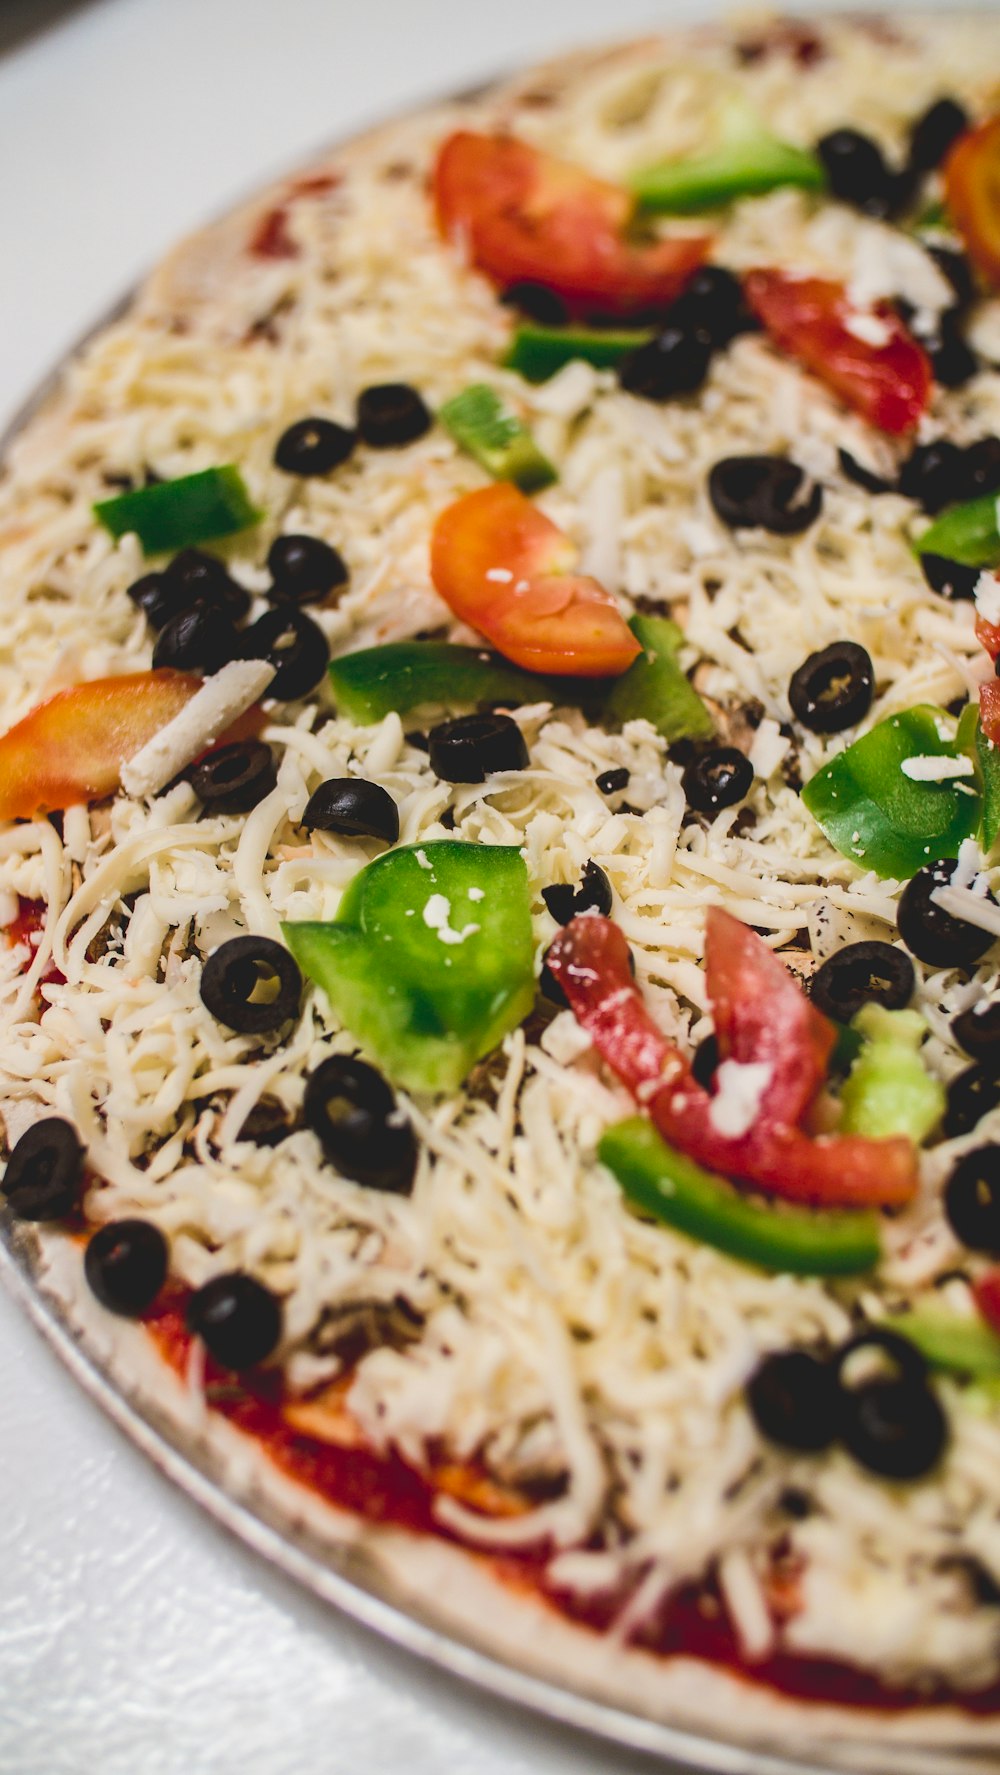 a pizza with cheese, olives, peppers, and cheese